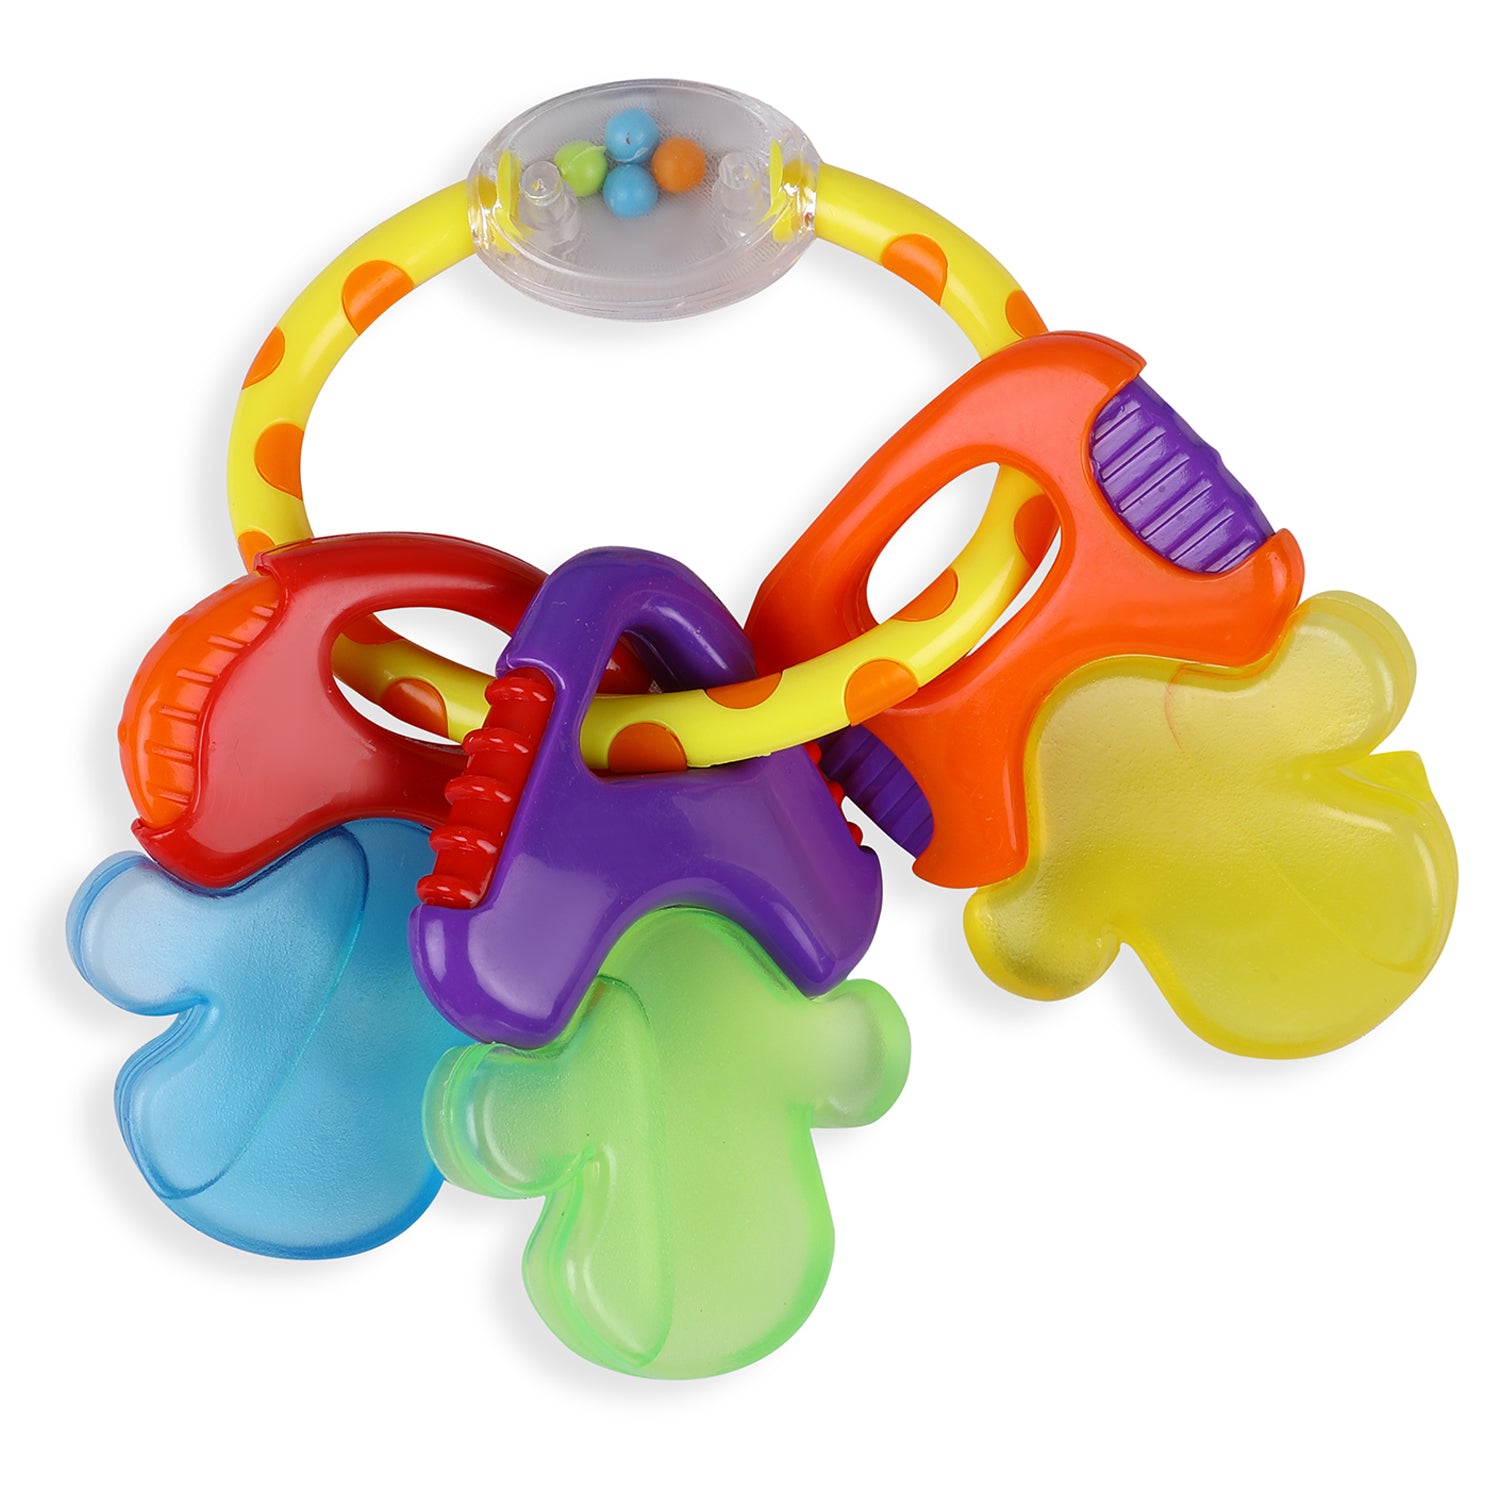 Gifting Play Kit With Activity Toys And Teethers 6M+ - Baby Moo